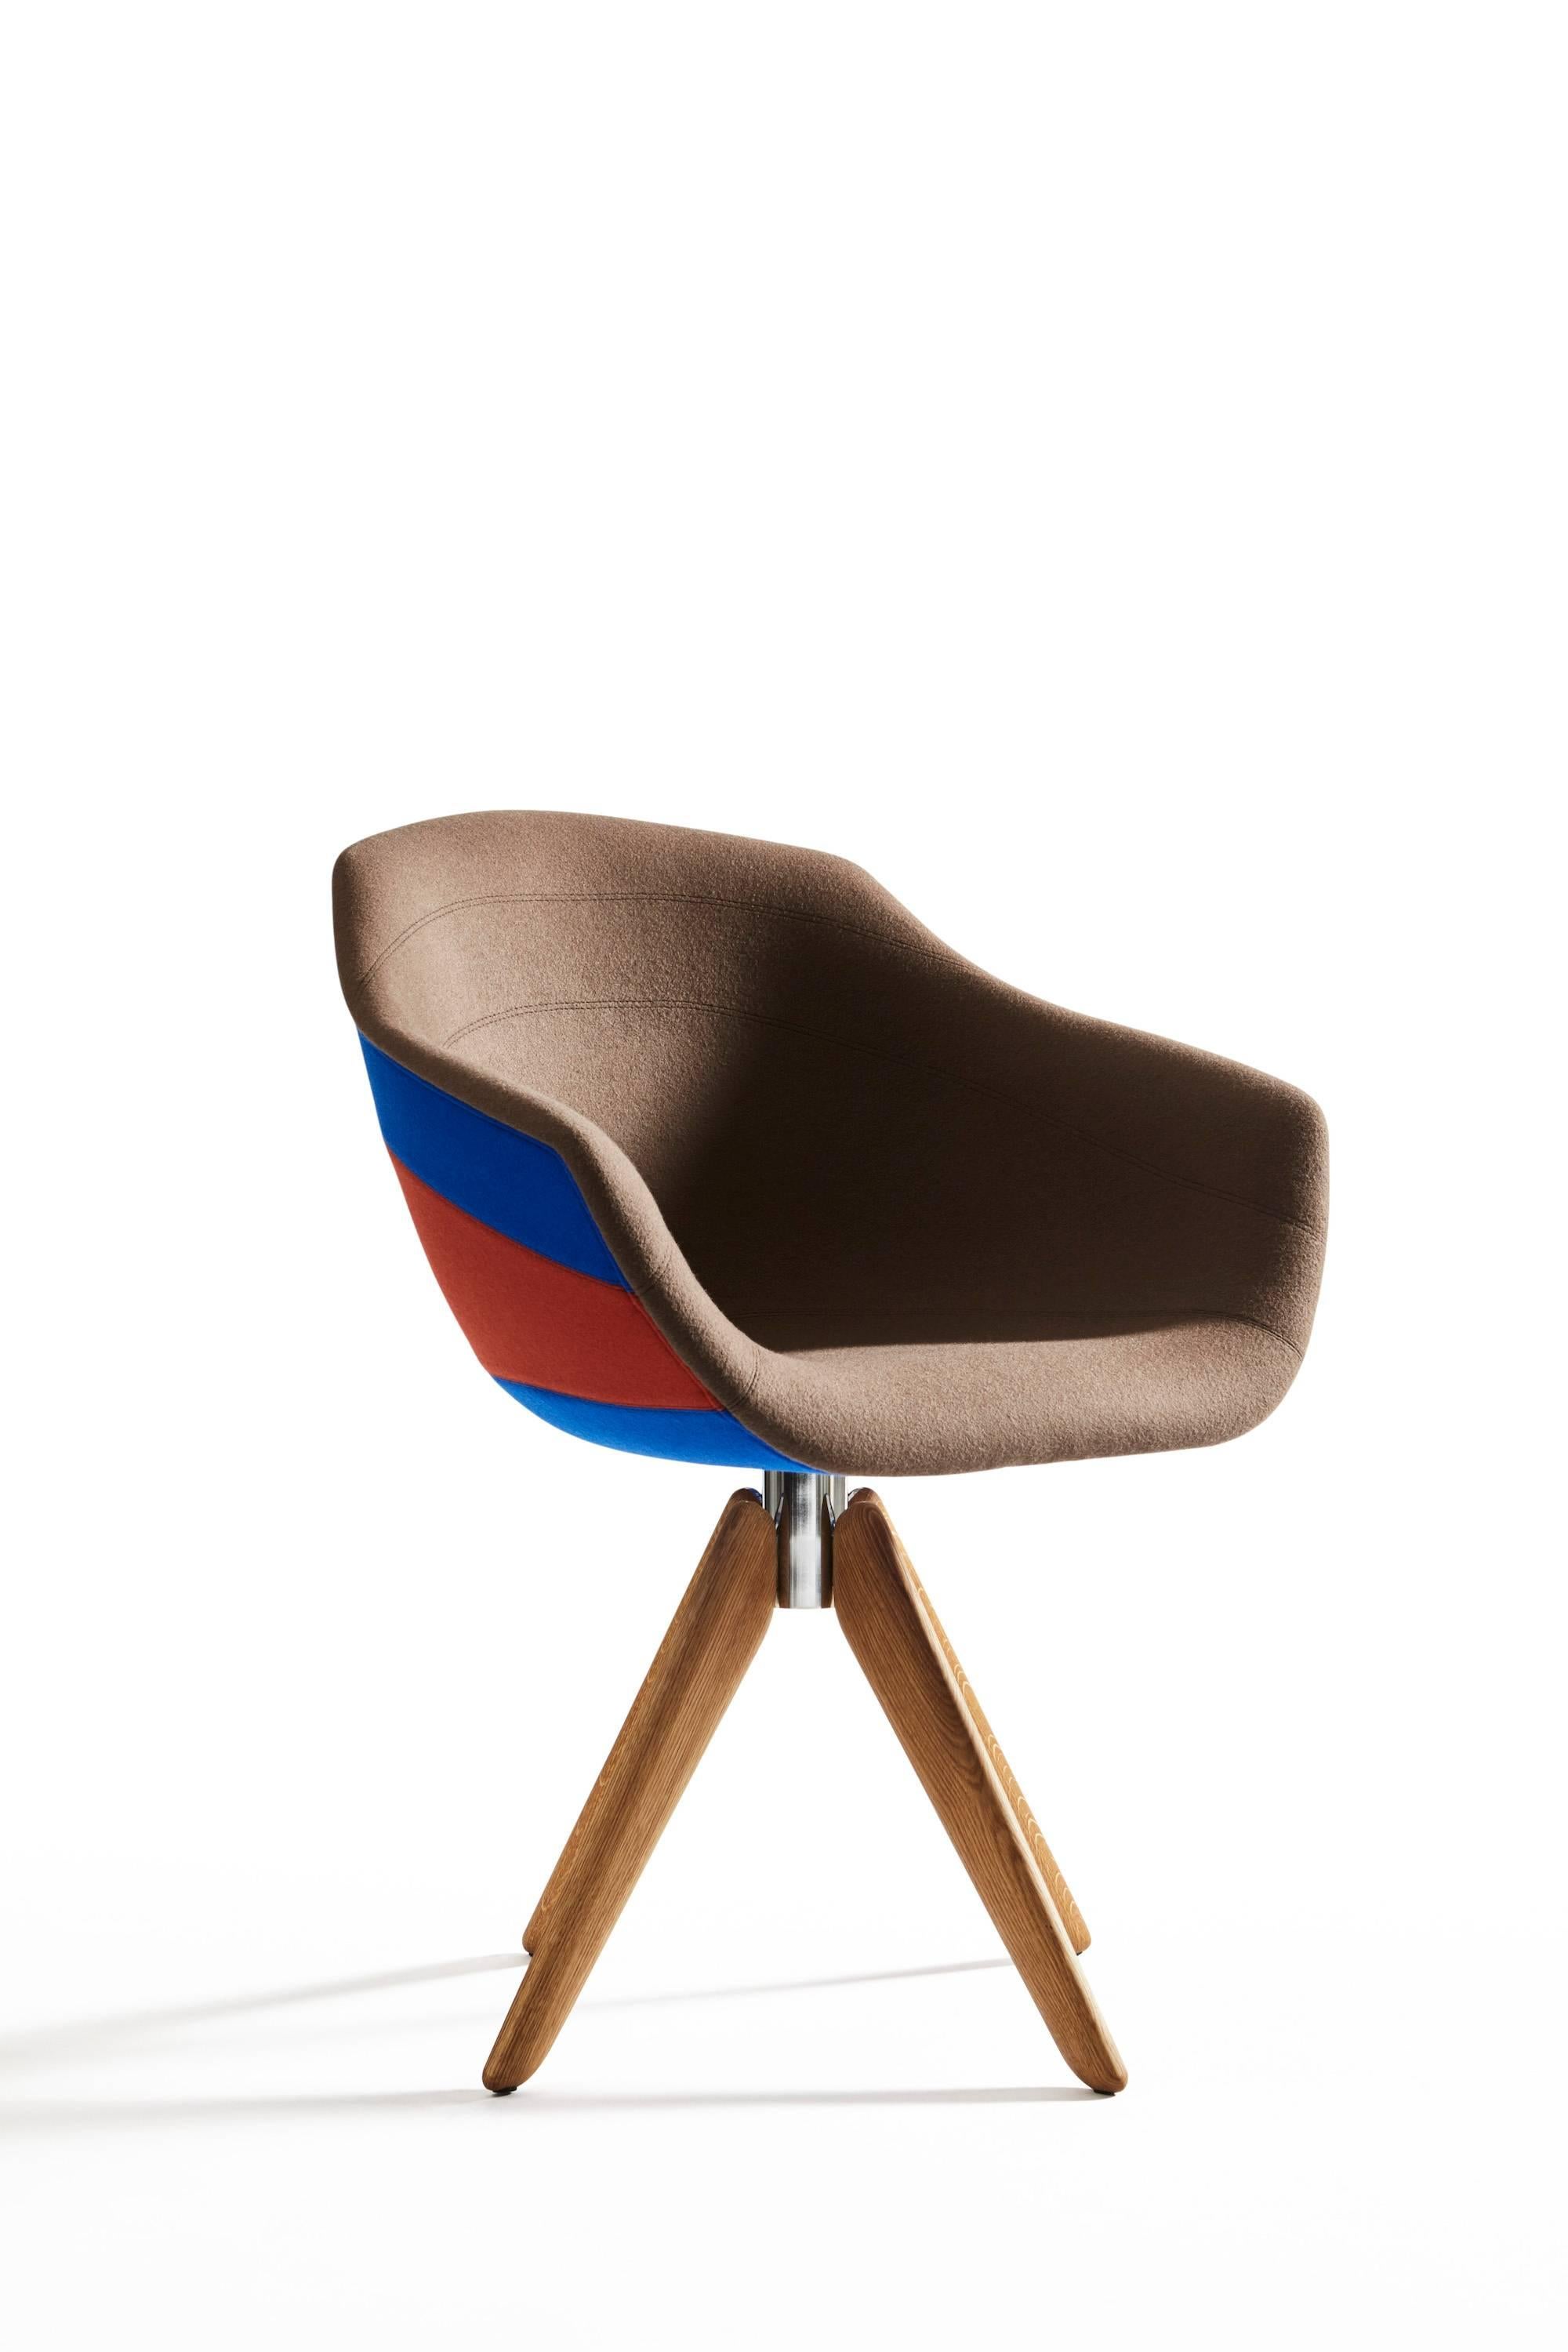 Modern Moooi Canal Chair by Luca Nichetto in Seven Fabric Stripe & Three Base Options For Sale